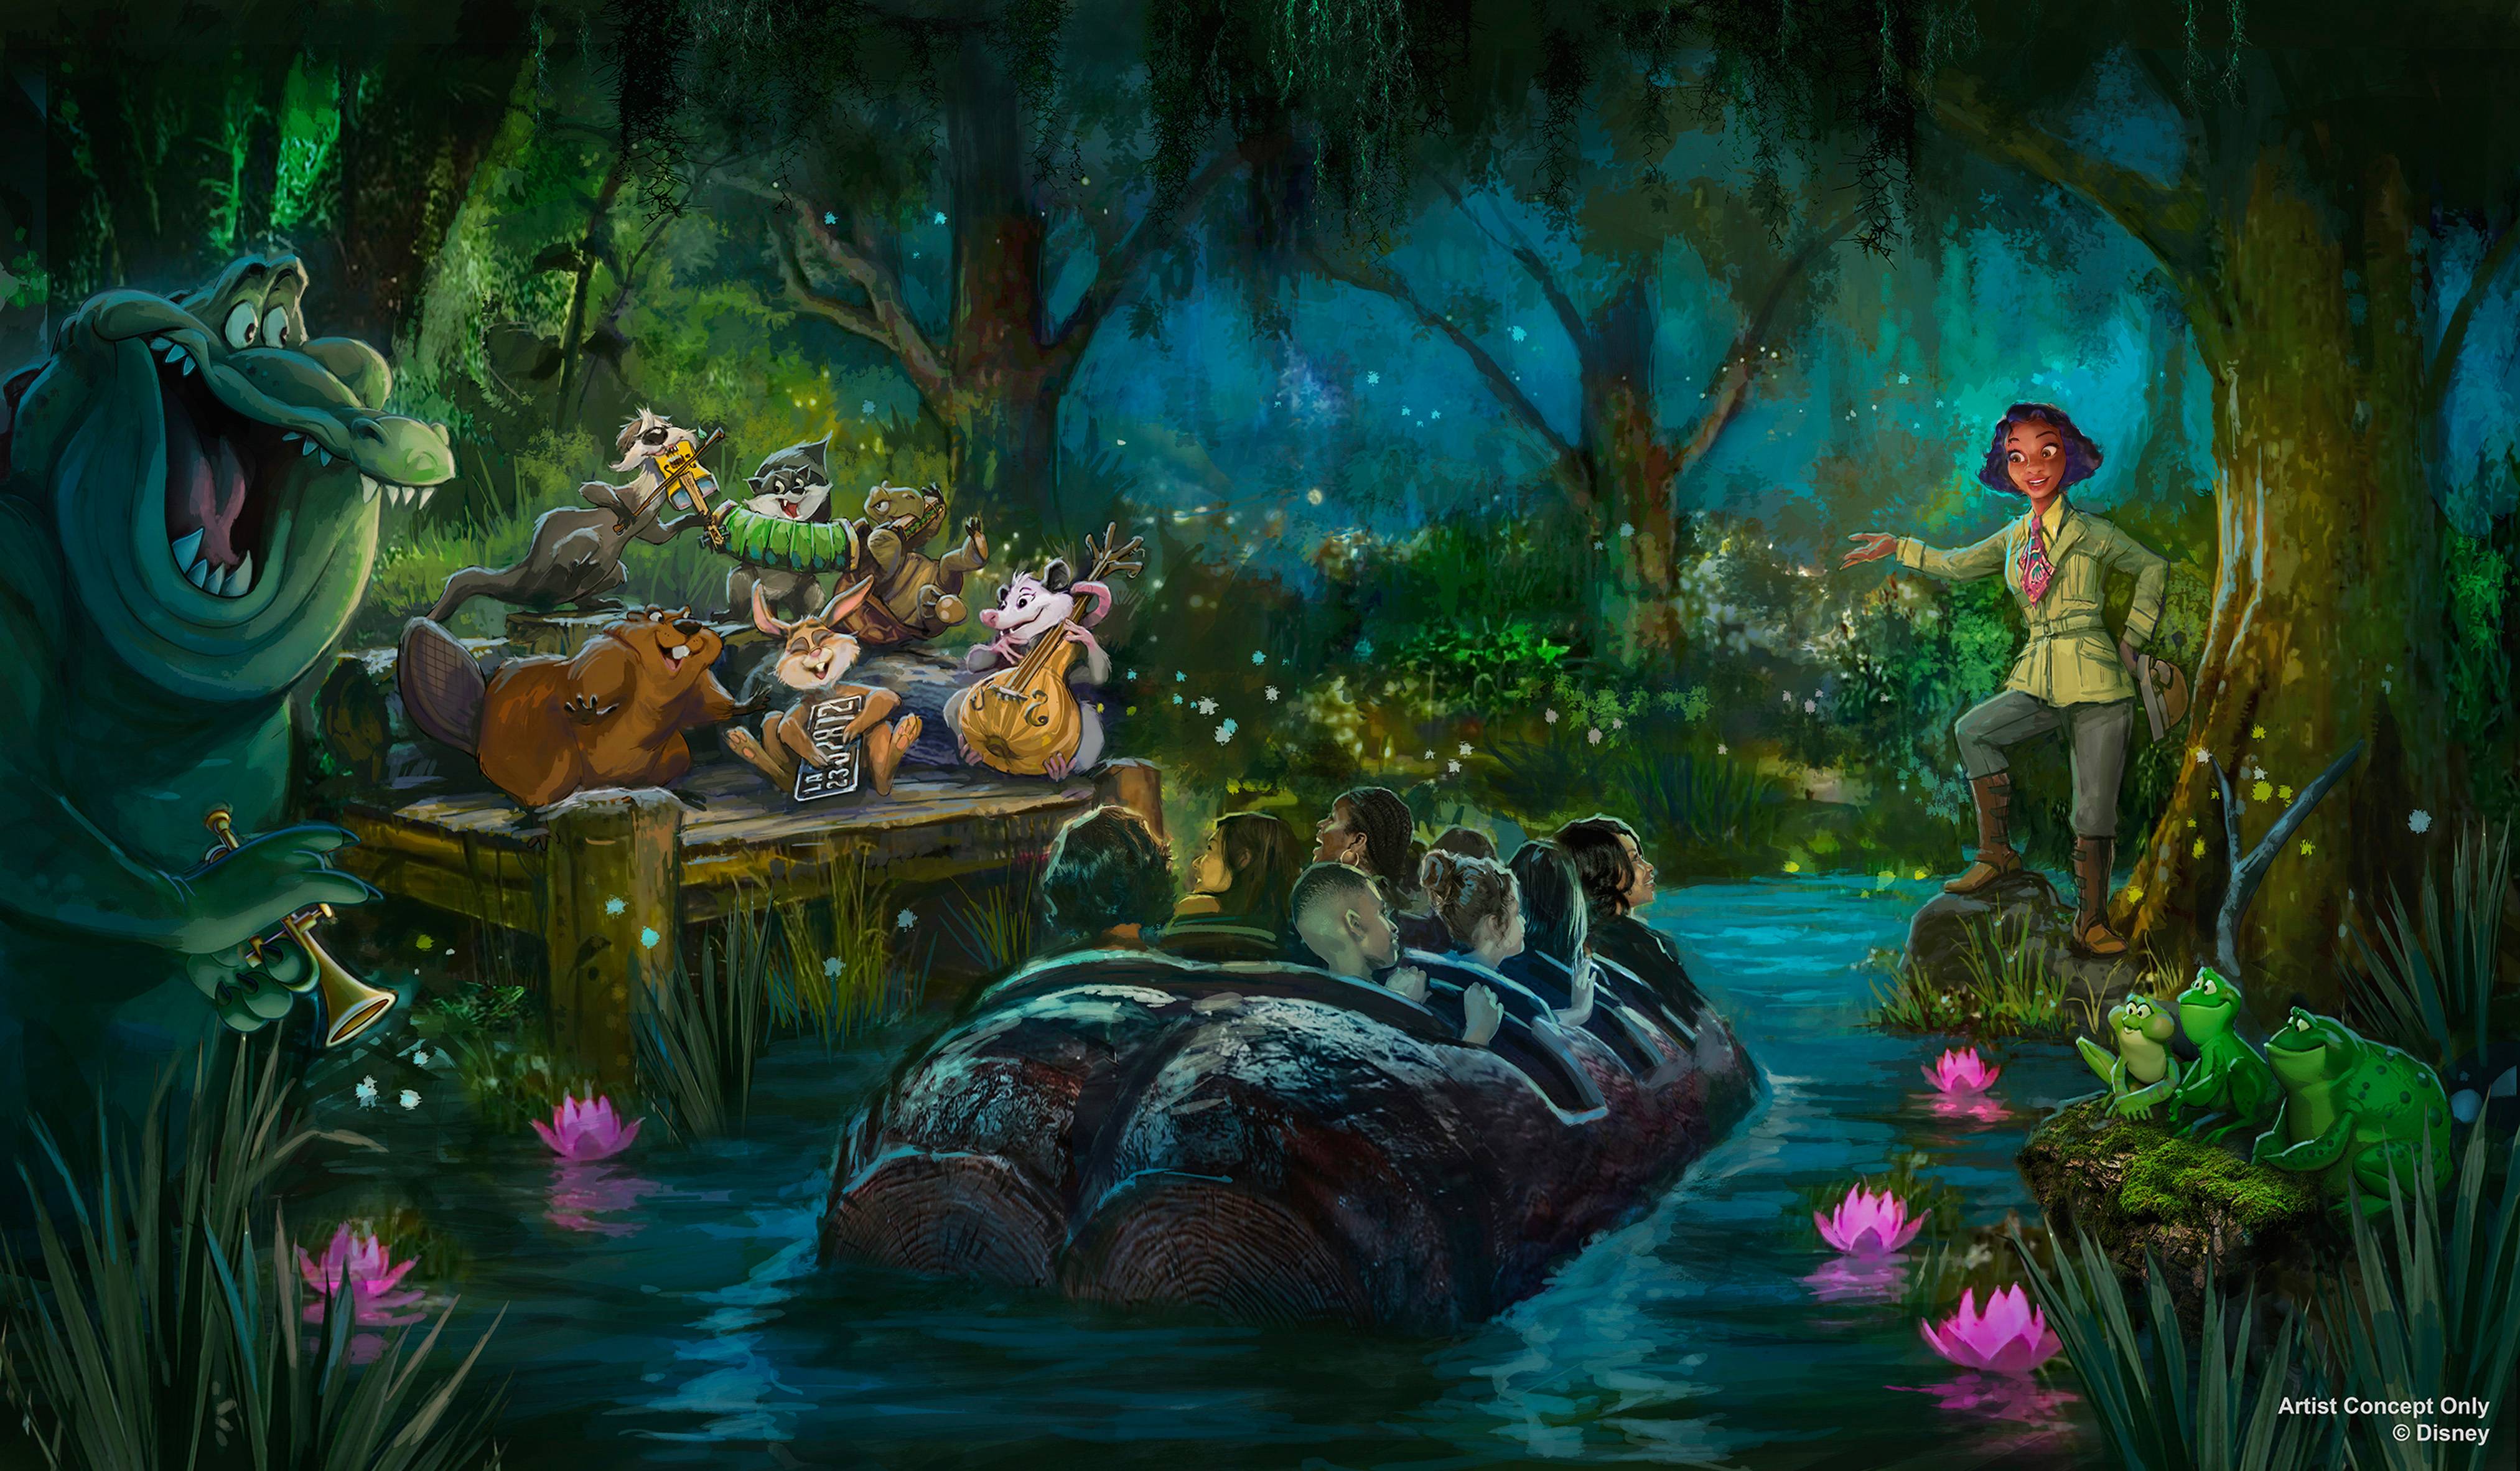 New concept art and show scene description for Tiana's Bayou Adventure coming in 2024 to Walt Disney World